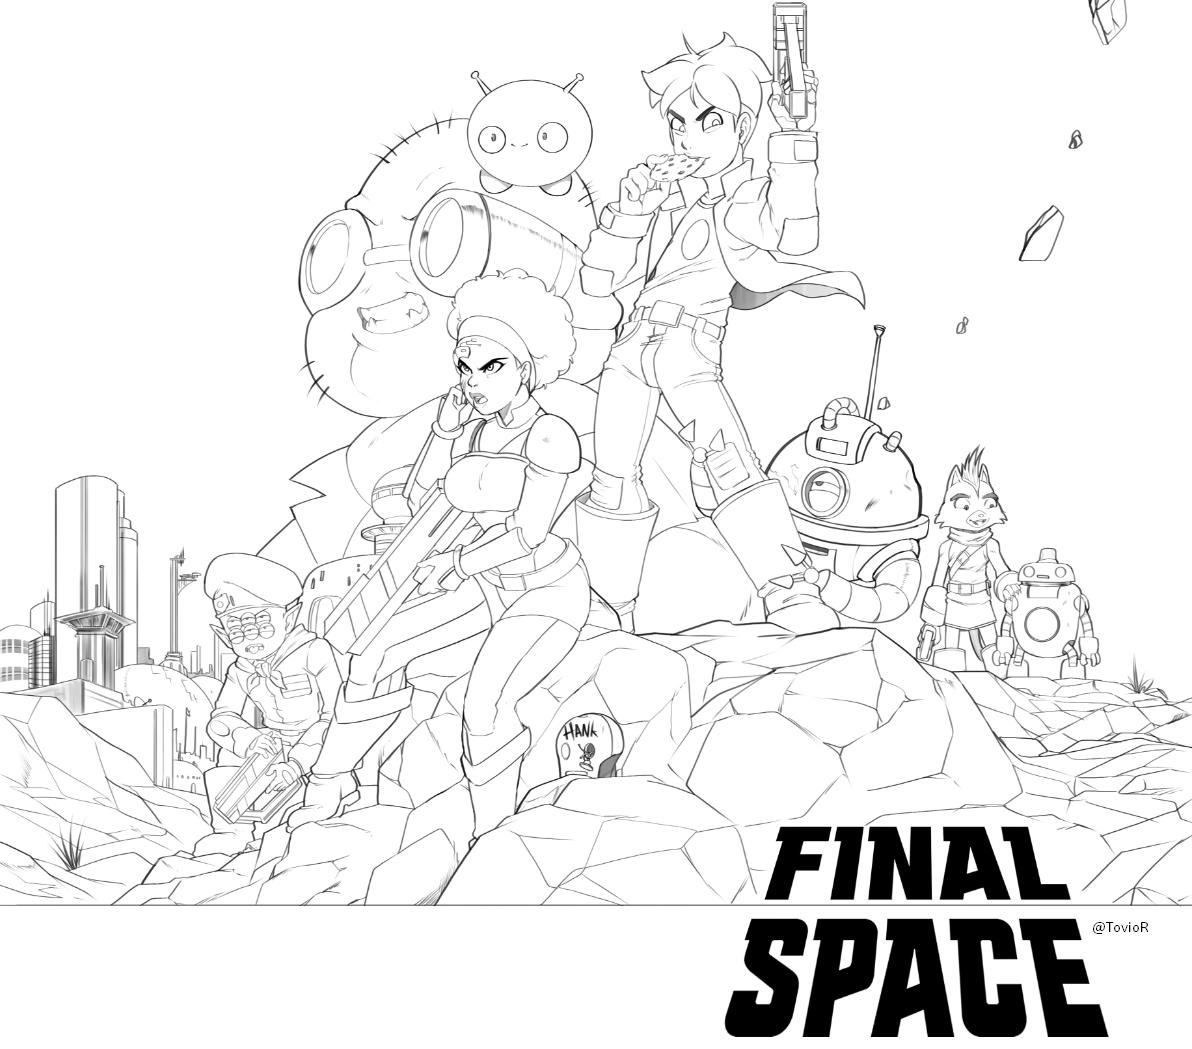 got a good bit of this done. i'll knock the rest out in a bit. #wip #finalspace 